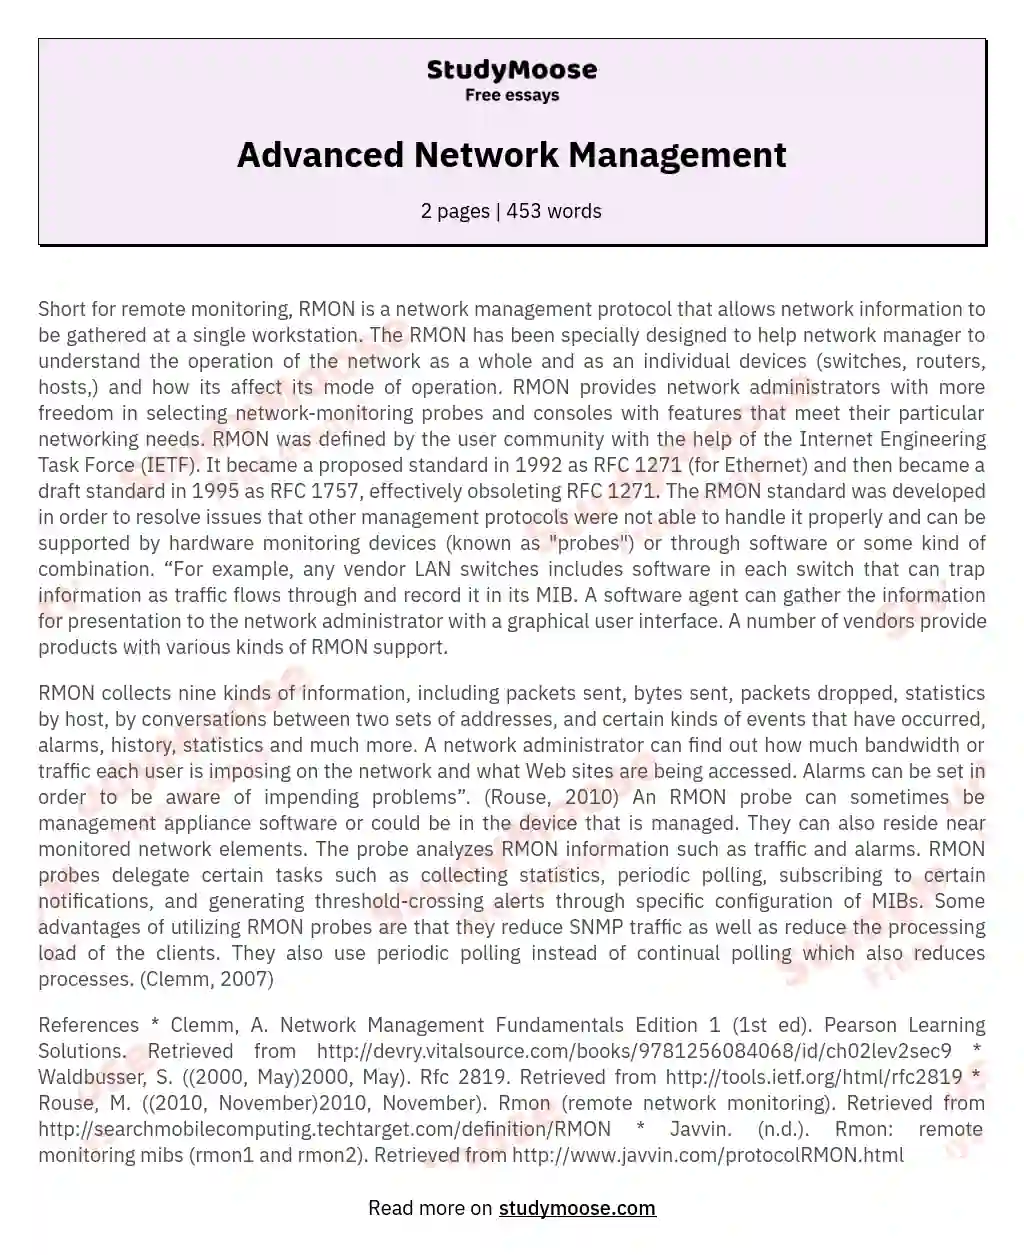 The Significance of RMON in Network Management essay